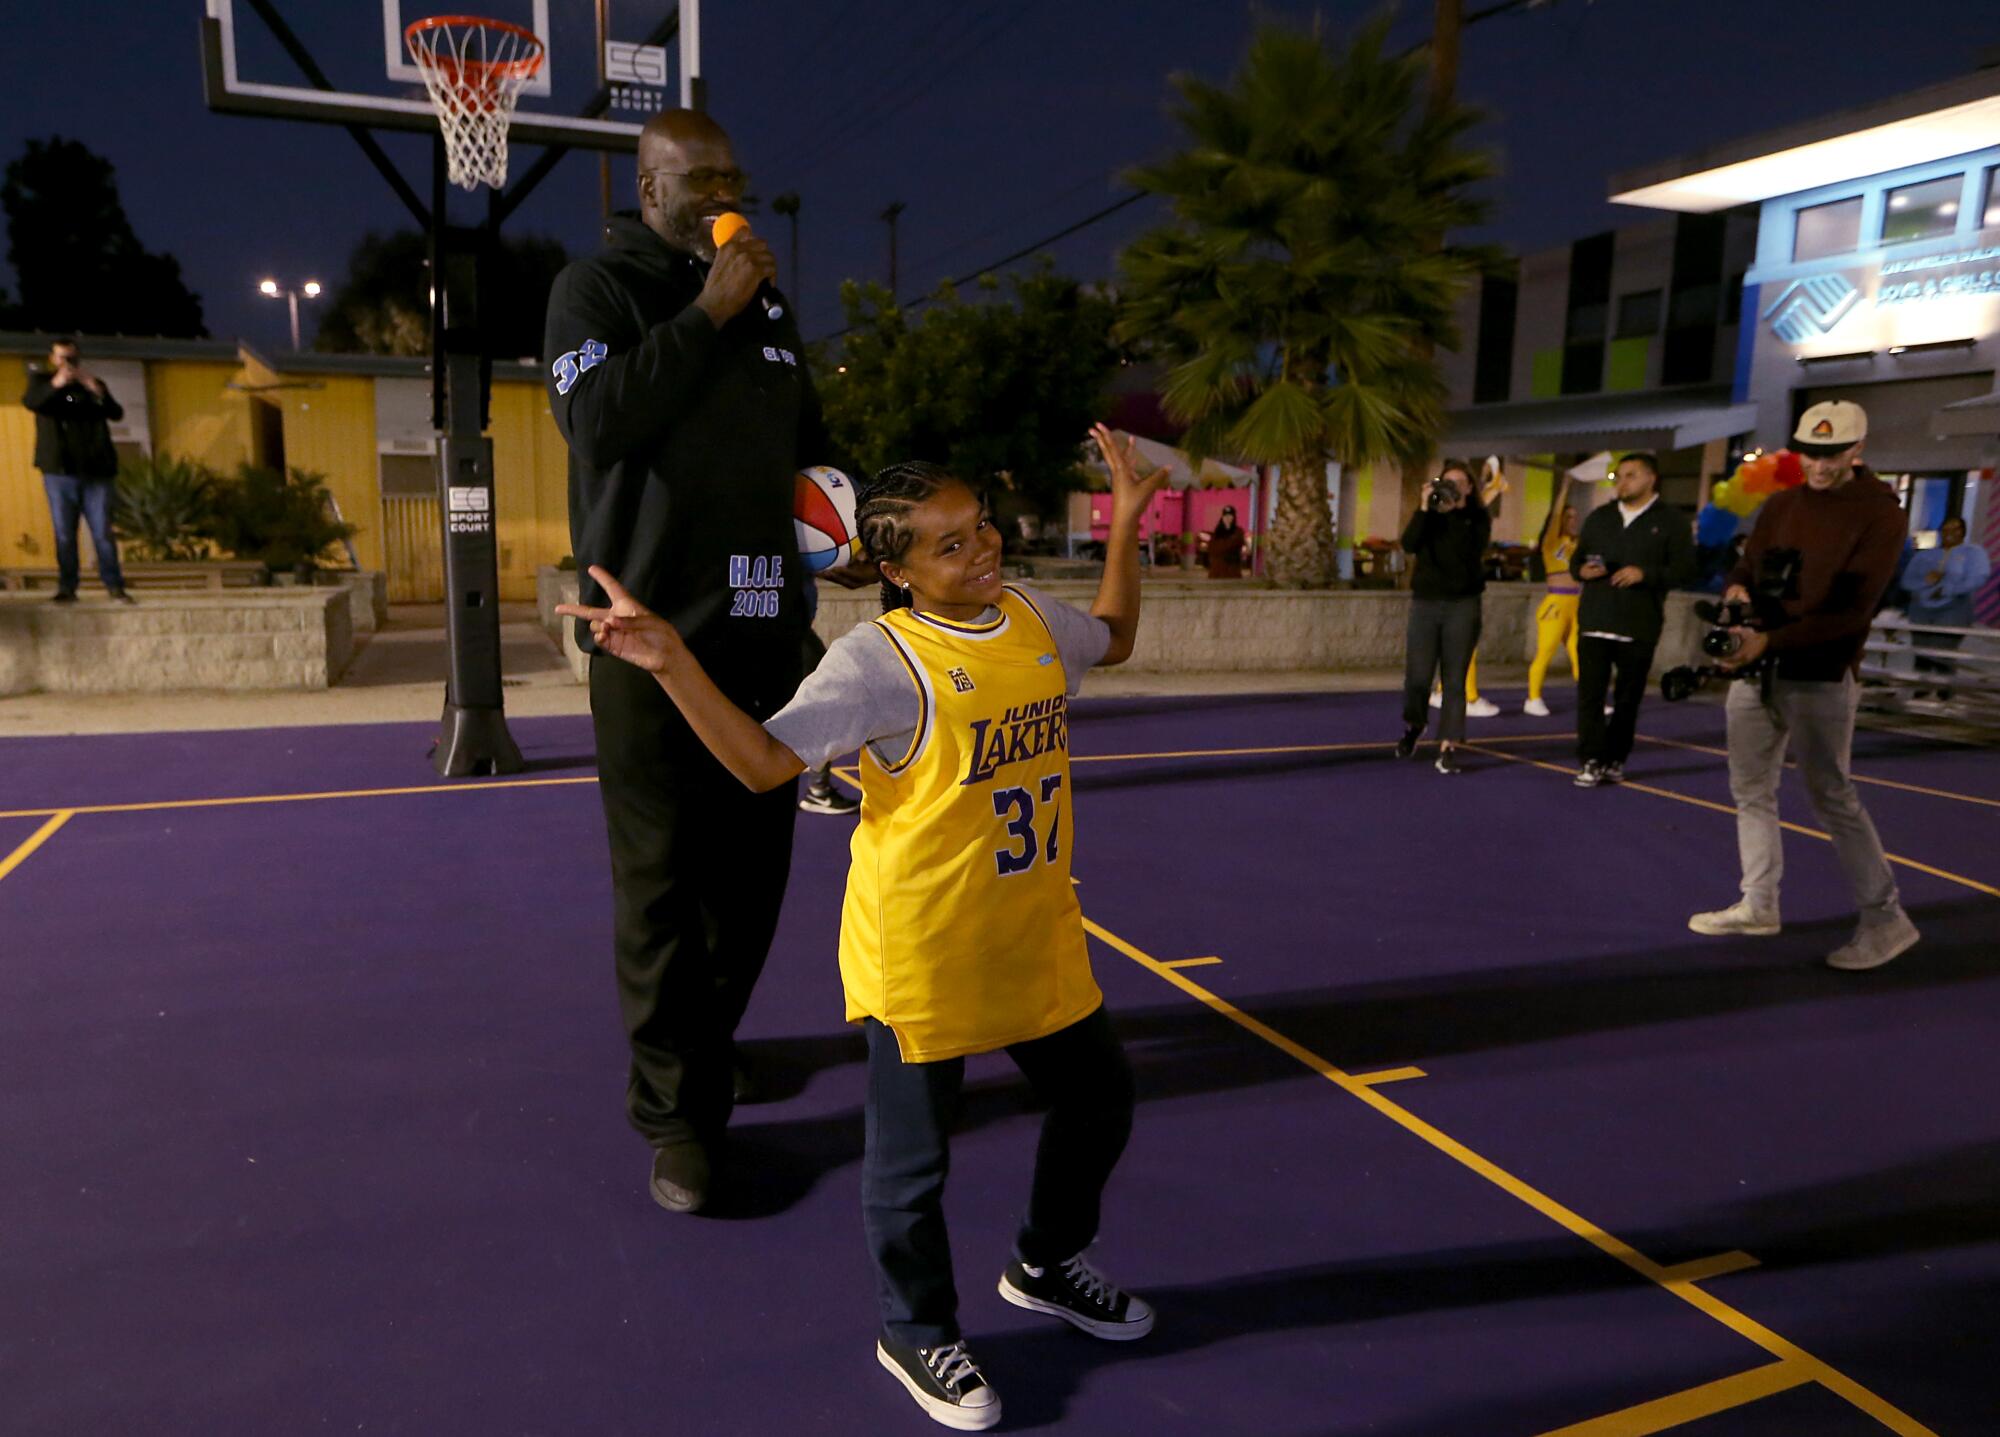 A fifth-grader celebrates next to Shaquille O'Neal after making a free throw.